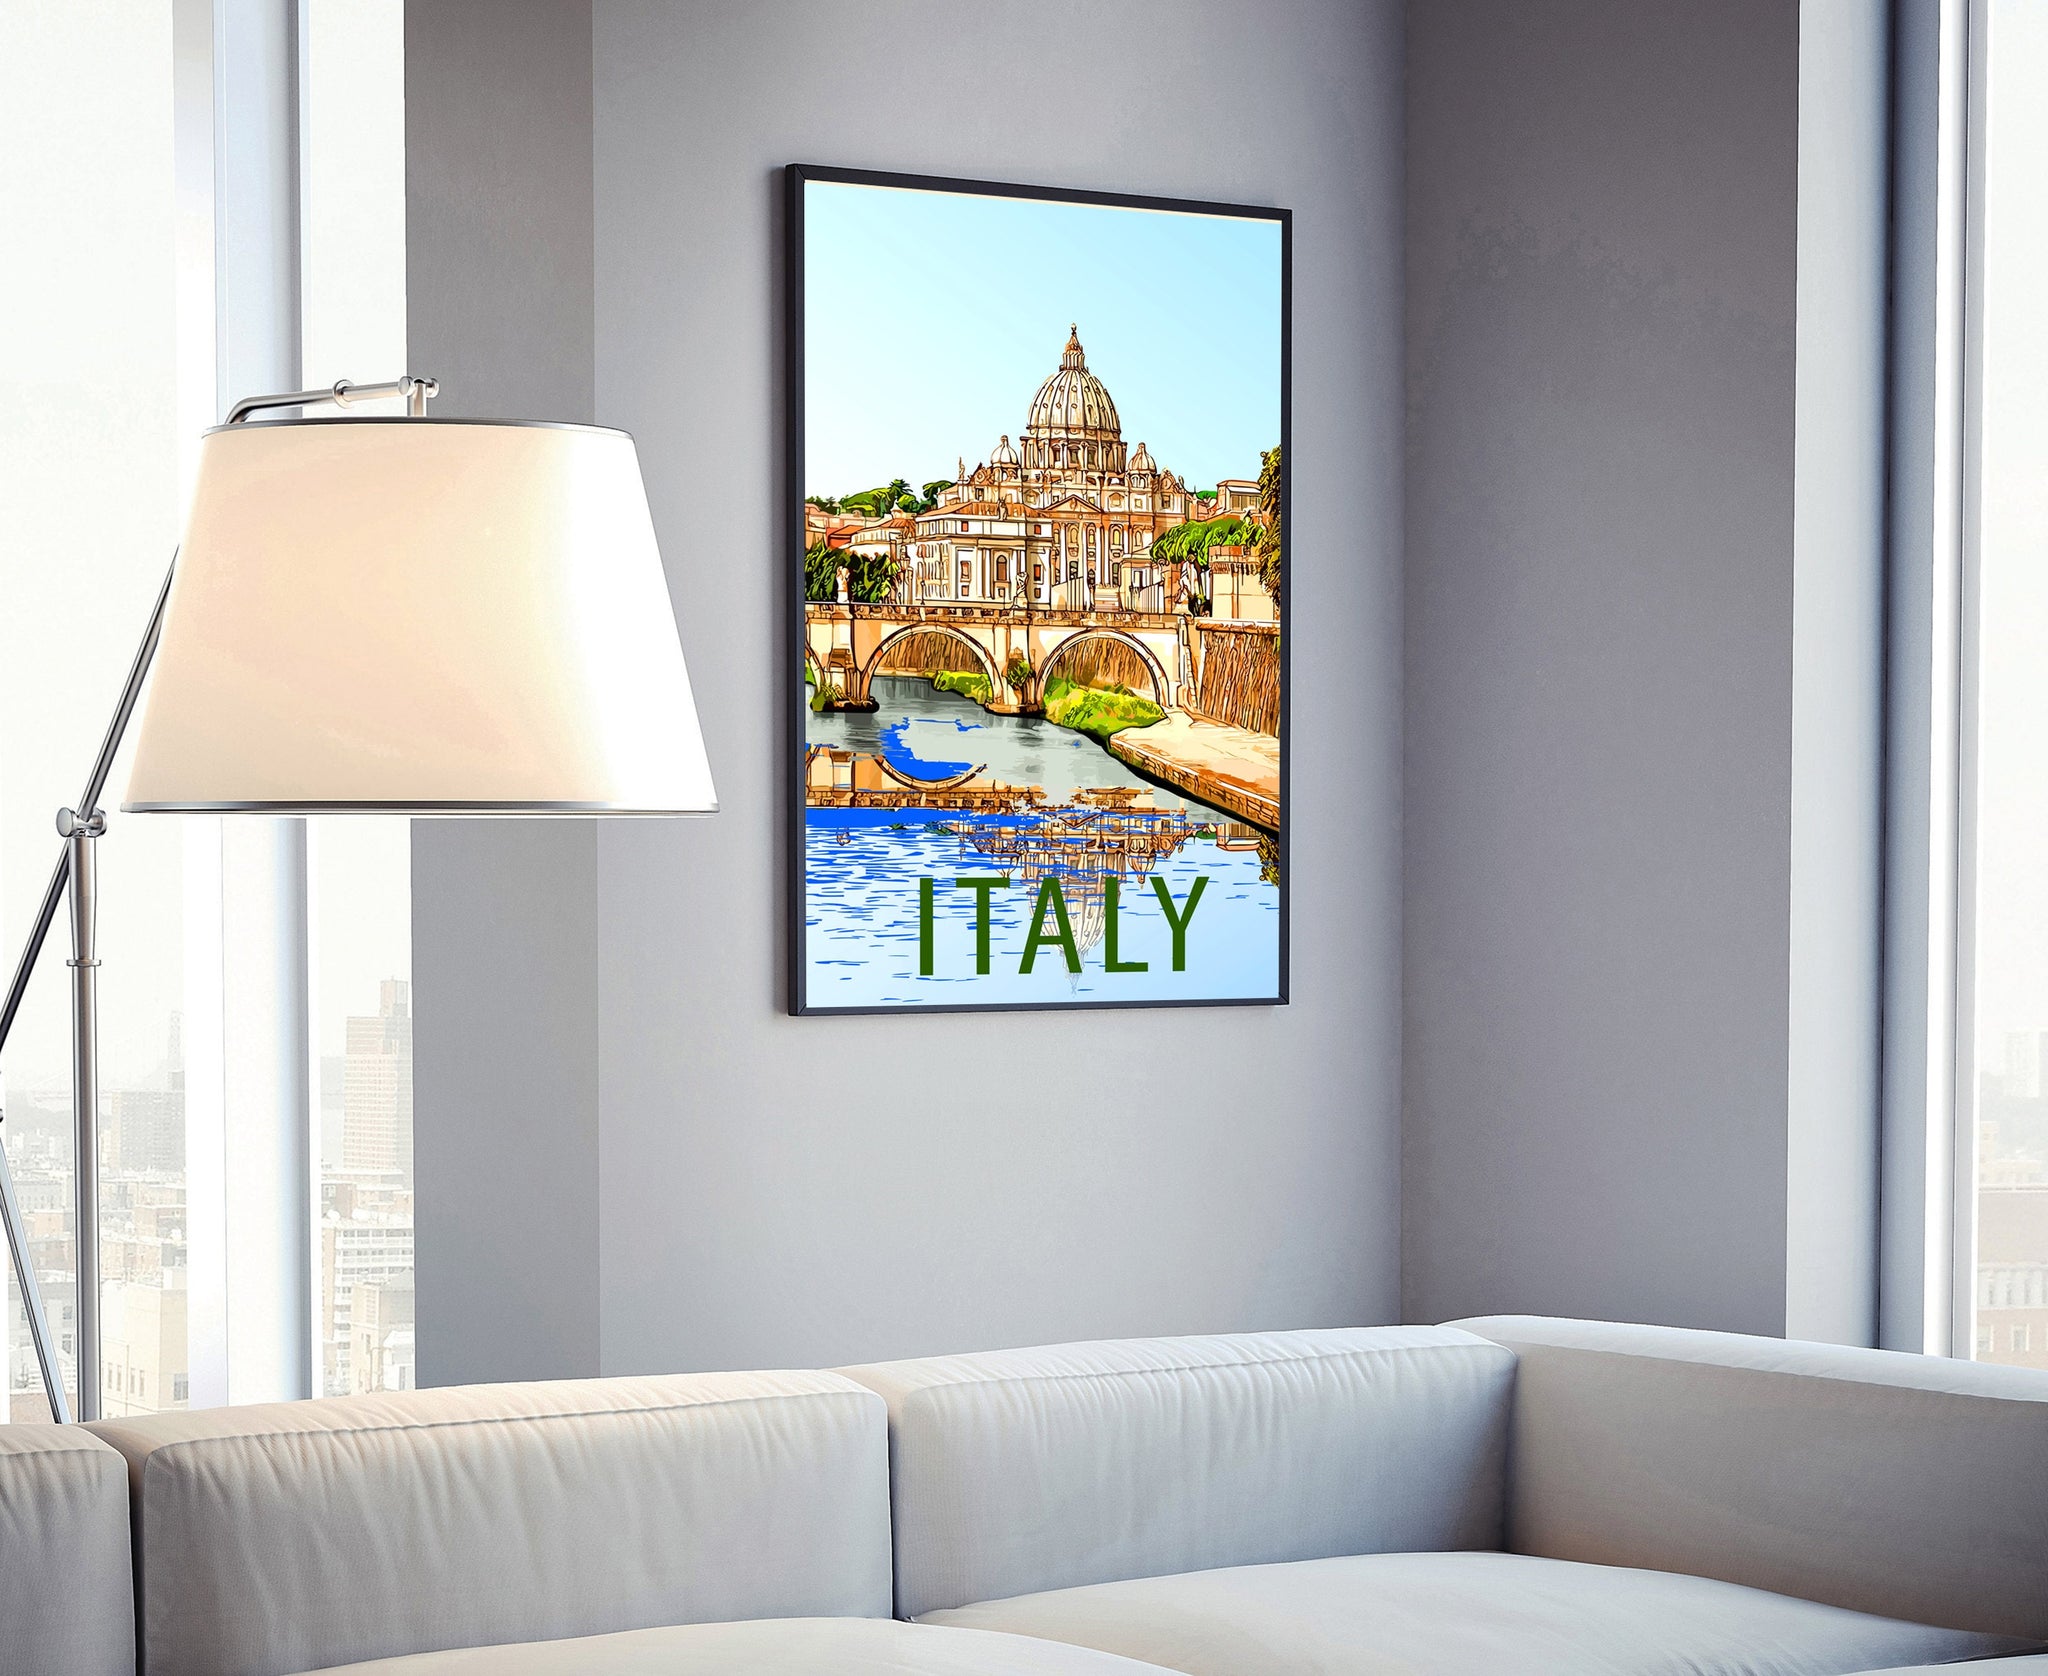 ITALY travel poster, Italy cityscape poster print, Italy landmark poster wall decoration, Home wall art, Office wall decoration